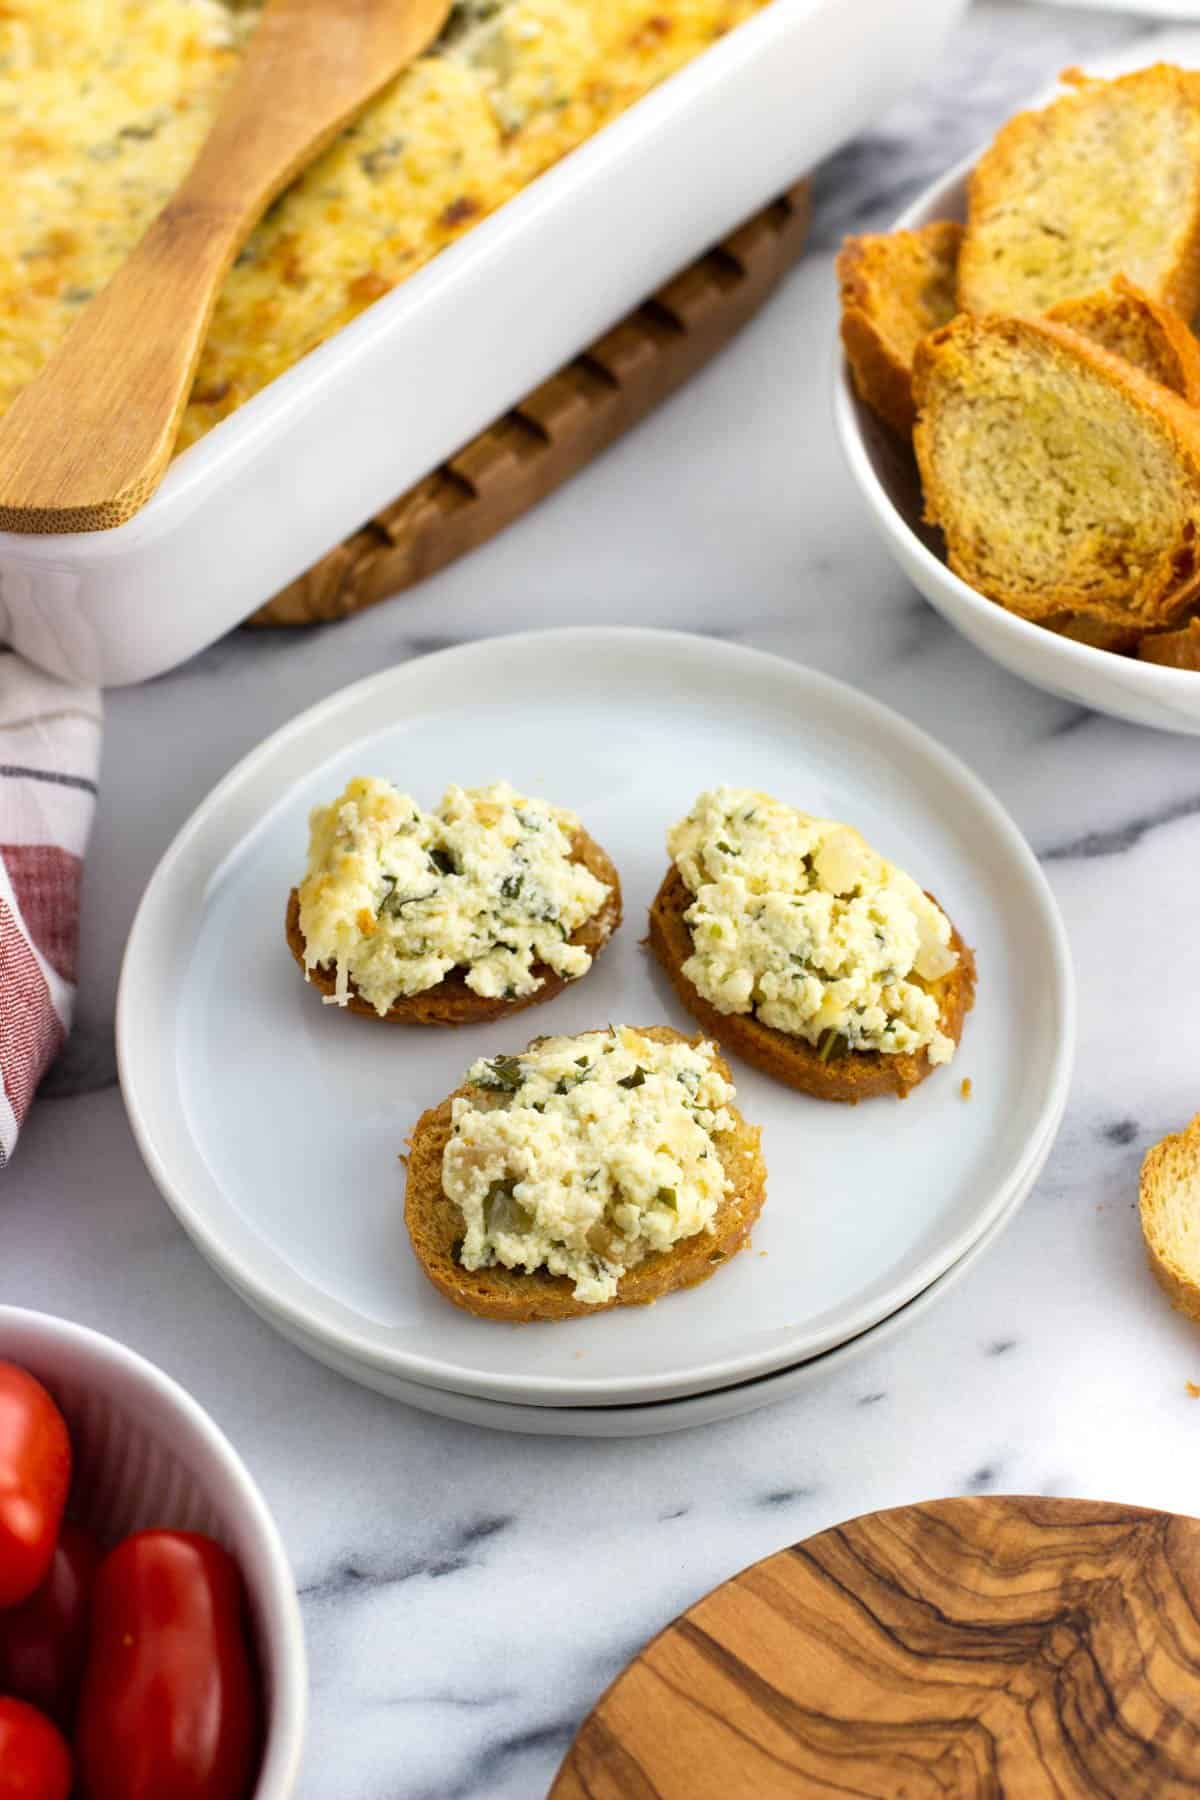 Three crostini topped with baked ricotta on an appetizer plate.